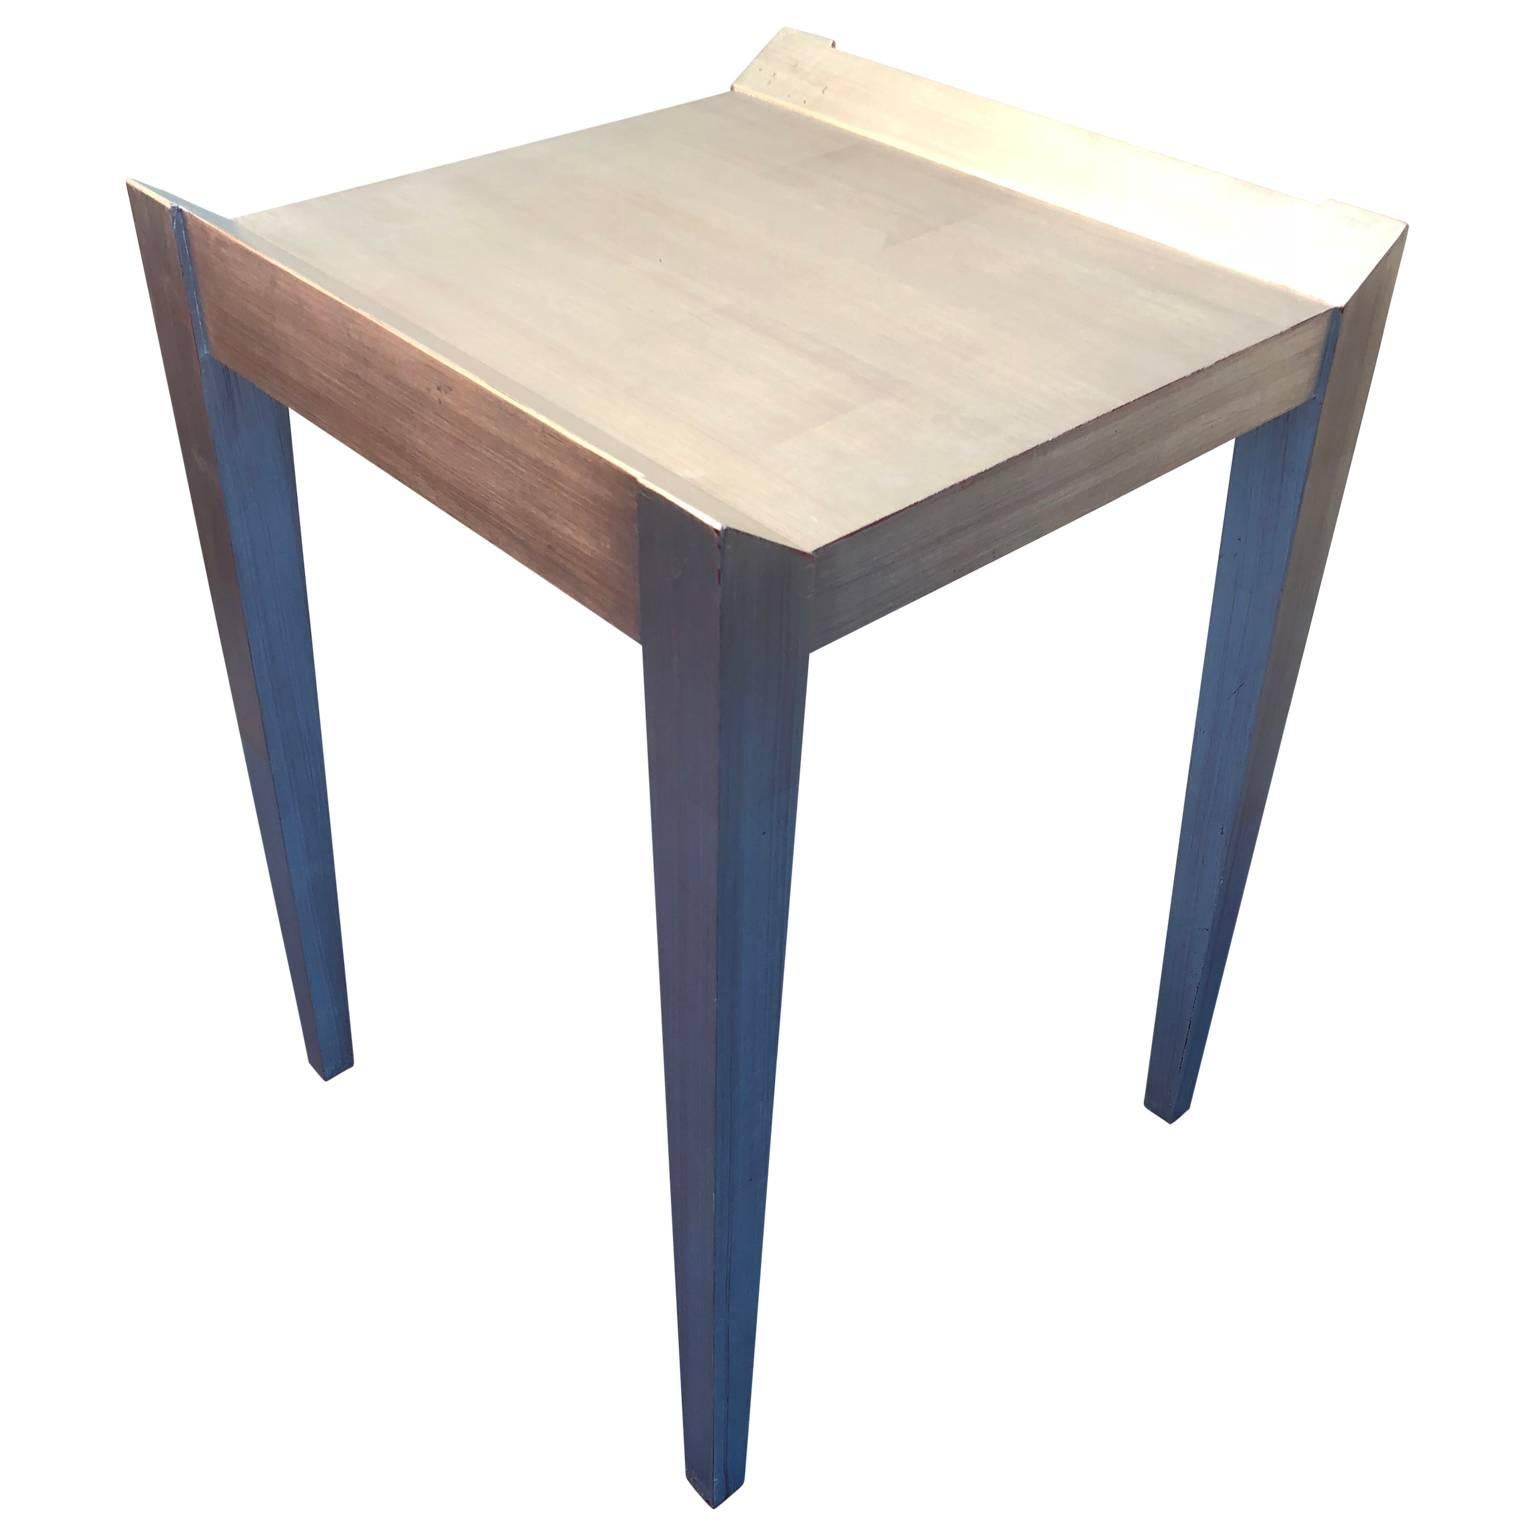 Square modern silver-leaf side table by Decca.